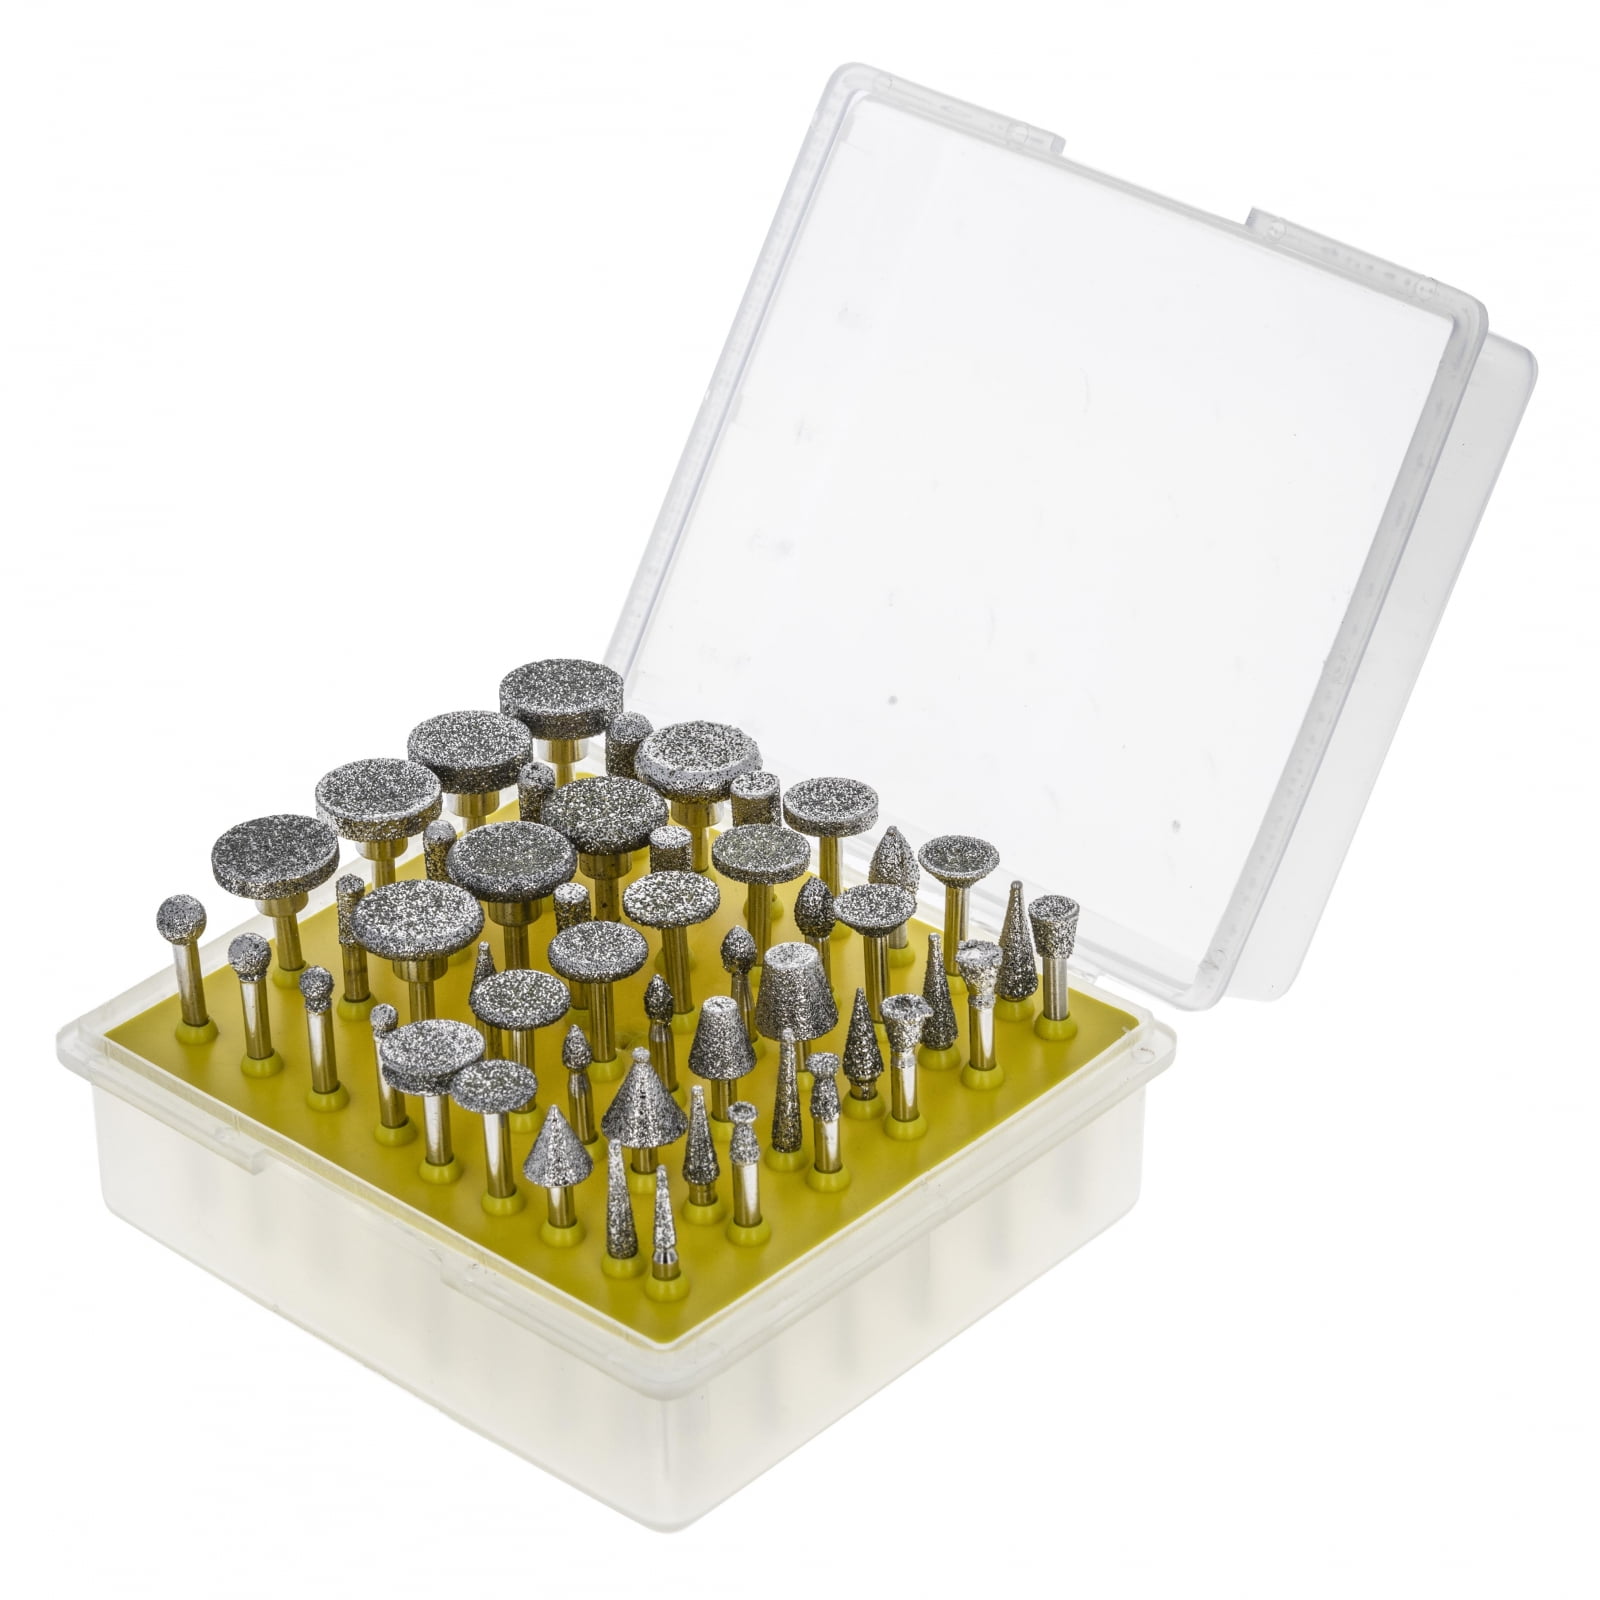 50Pcs Diamond Grinding Head,with 46 Grits 3mm Shank Diameter Marble Jewel Rotating Tools Accessories,Suitable for Edge Glass Tile 